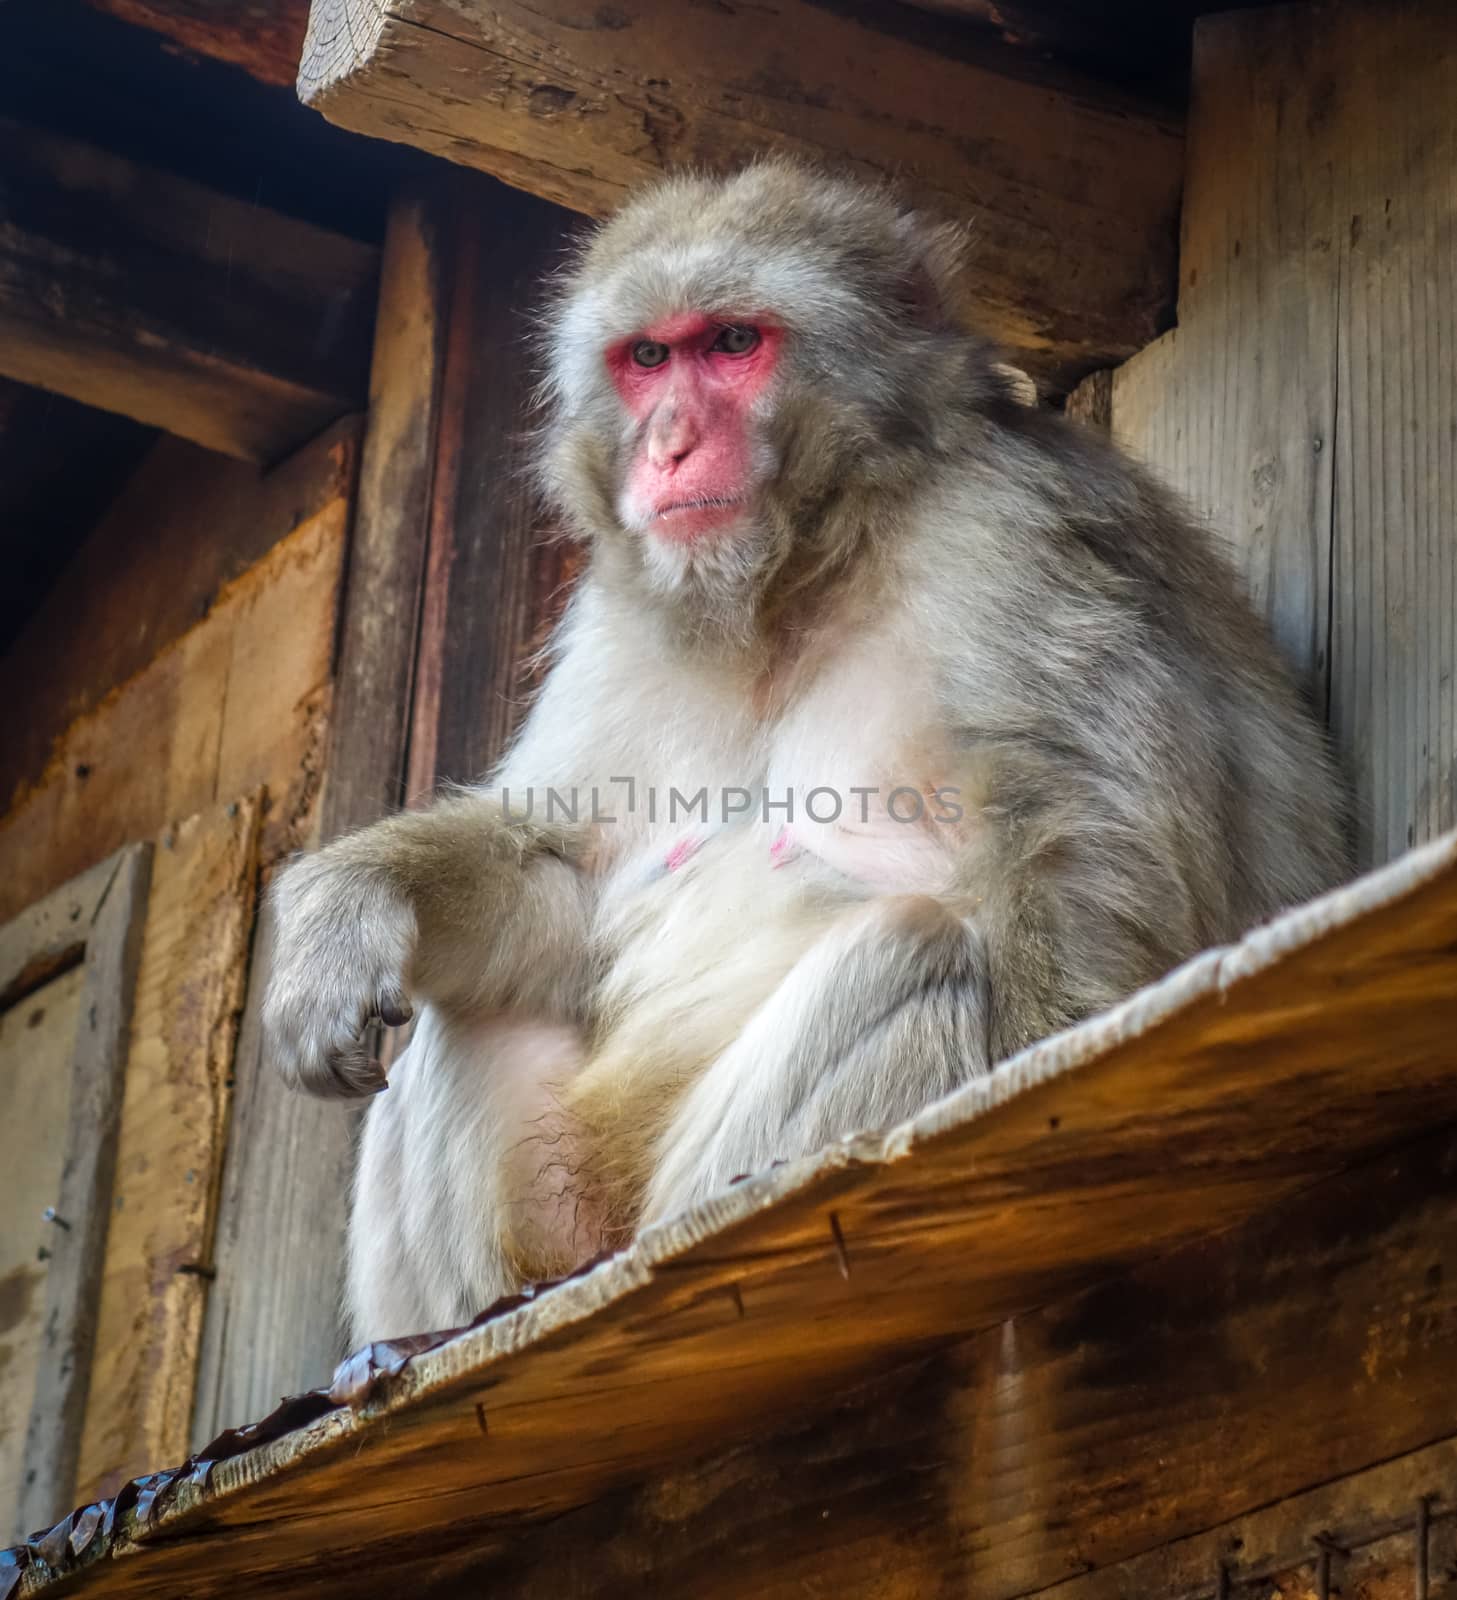 Japanese macaque on a rooftop in Iwatayama monkey park, Kyoto, Japan